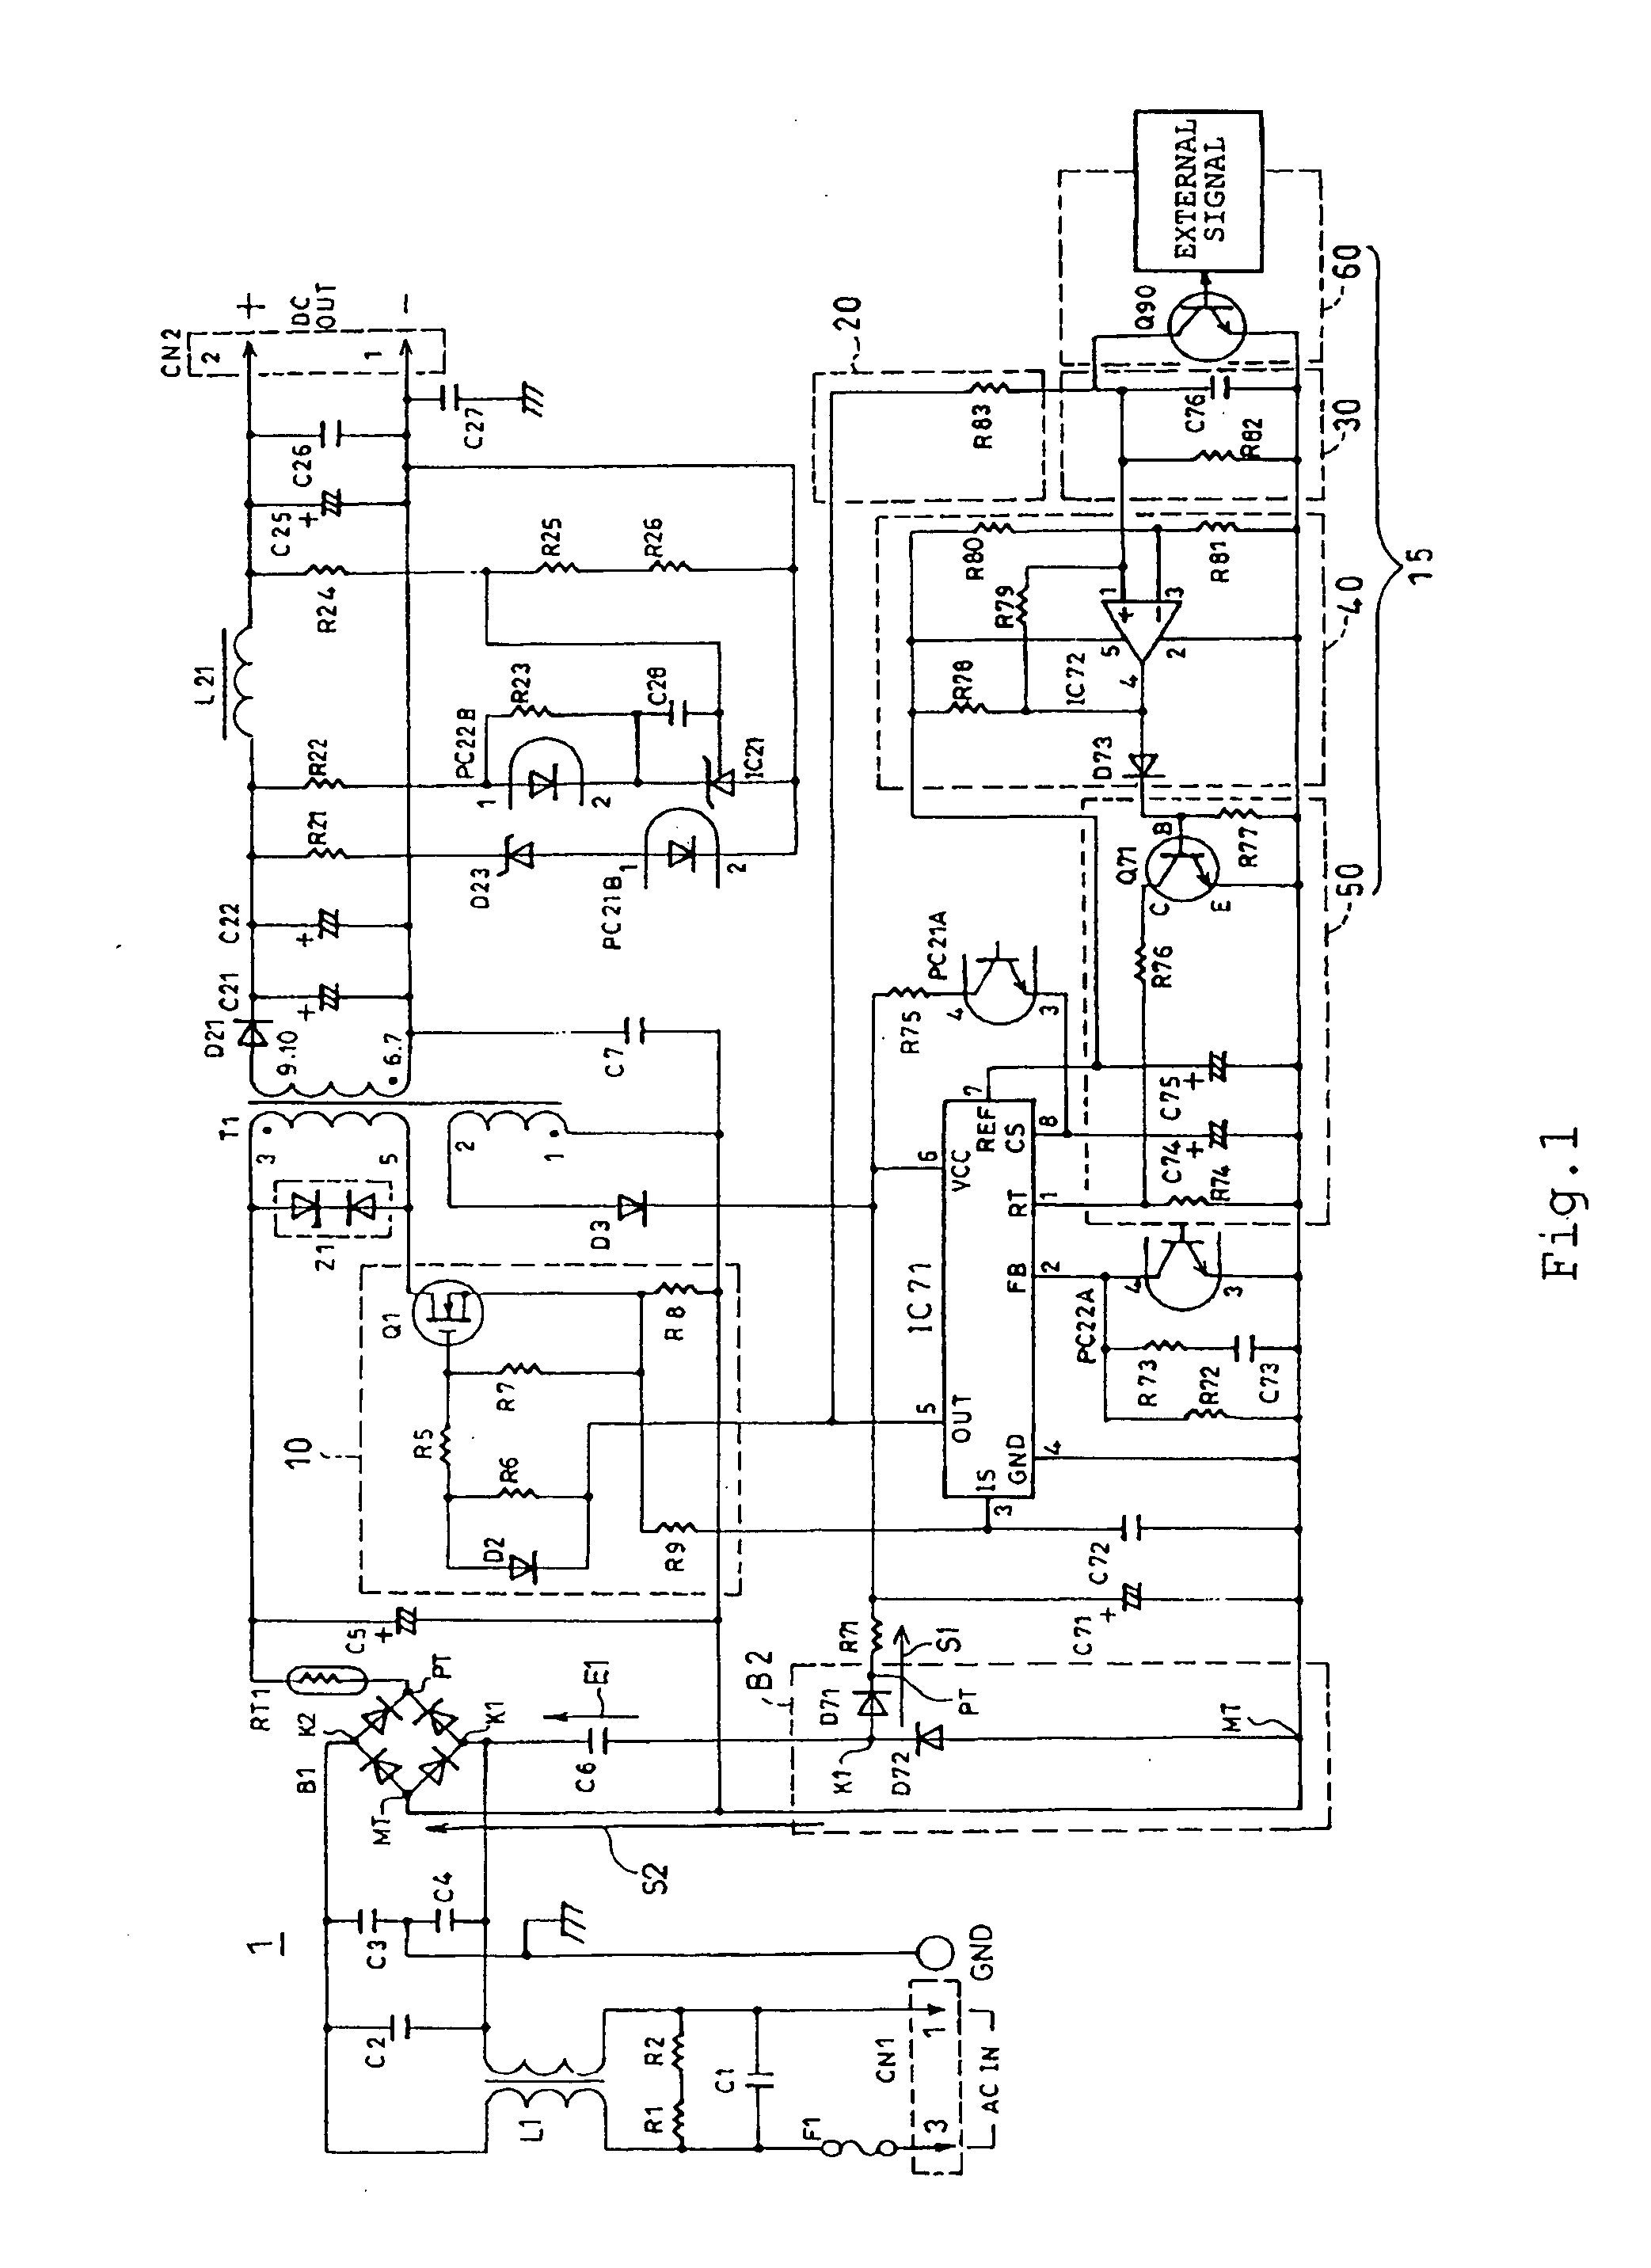 Switching power supply unit and method for setting switching frequency